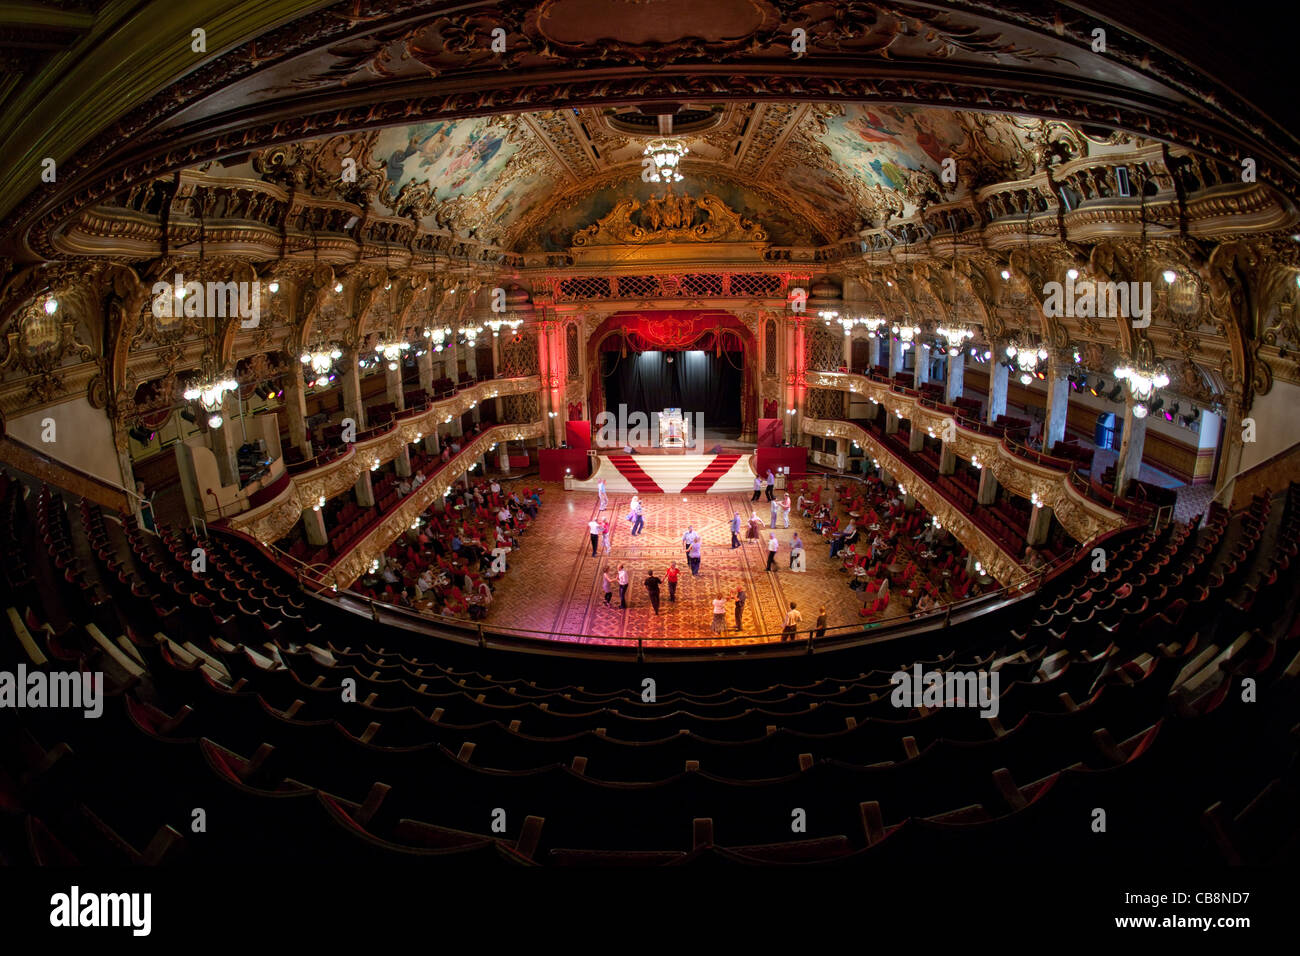 Blackpool Tower Ball Room Banque D'Images